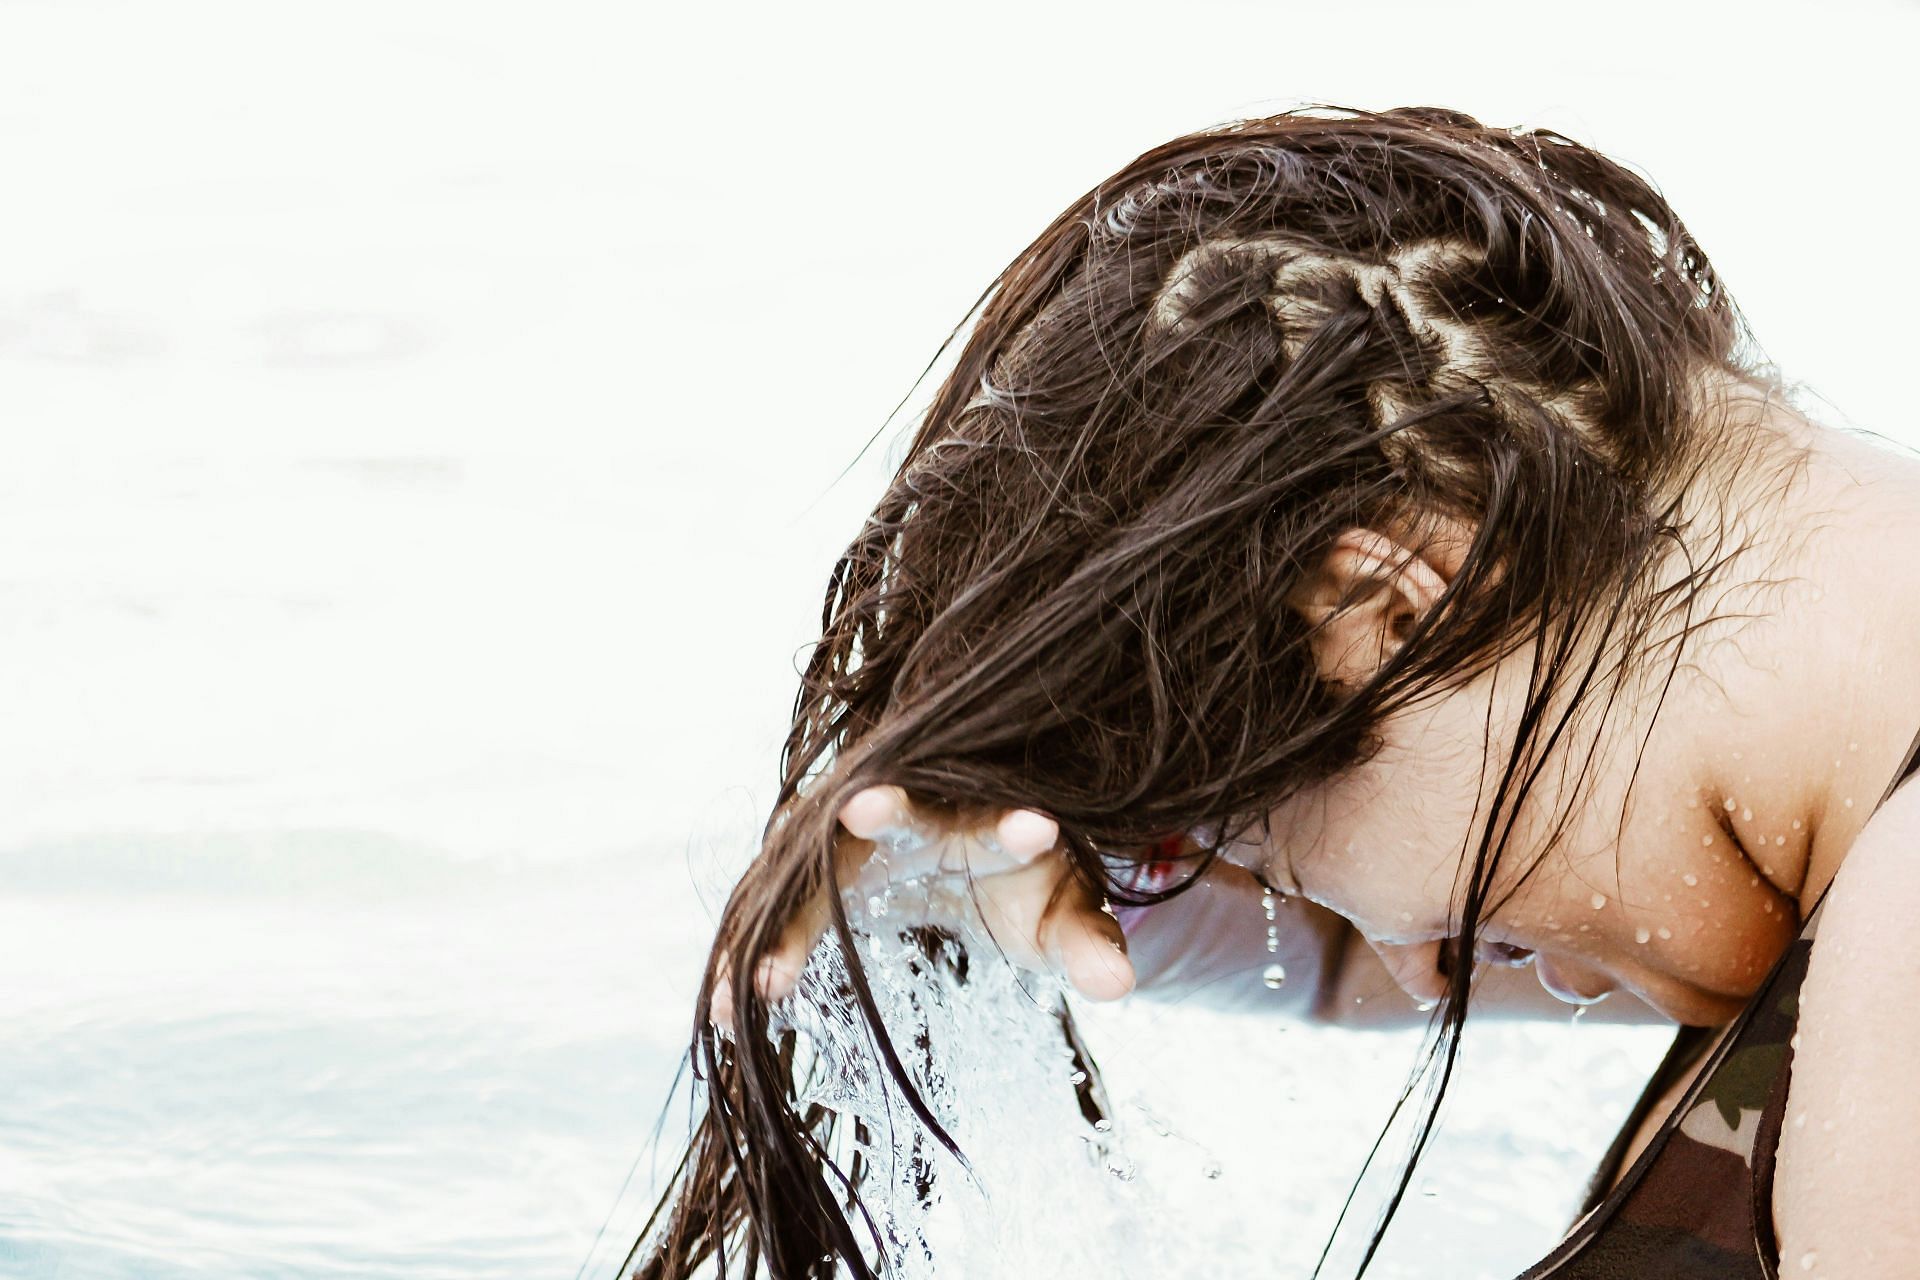 Hair masks are an important part of the K-Hair routine (Image by Erick Larregui/Unsplash)